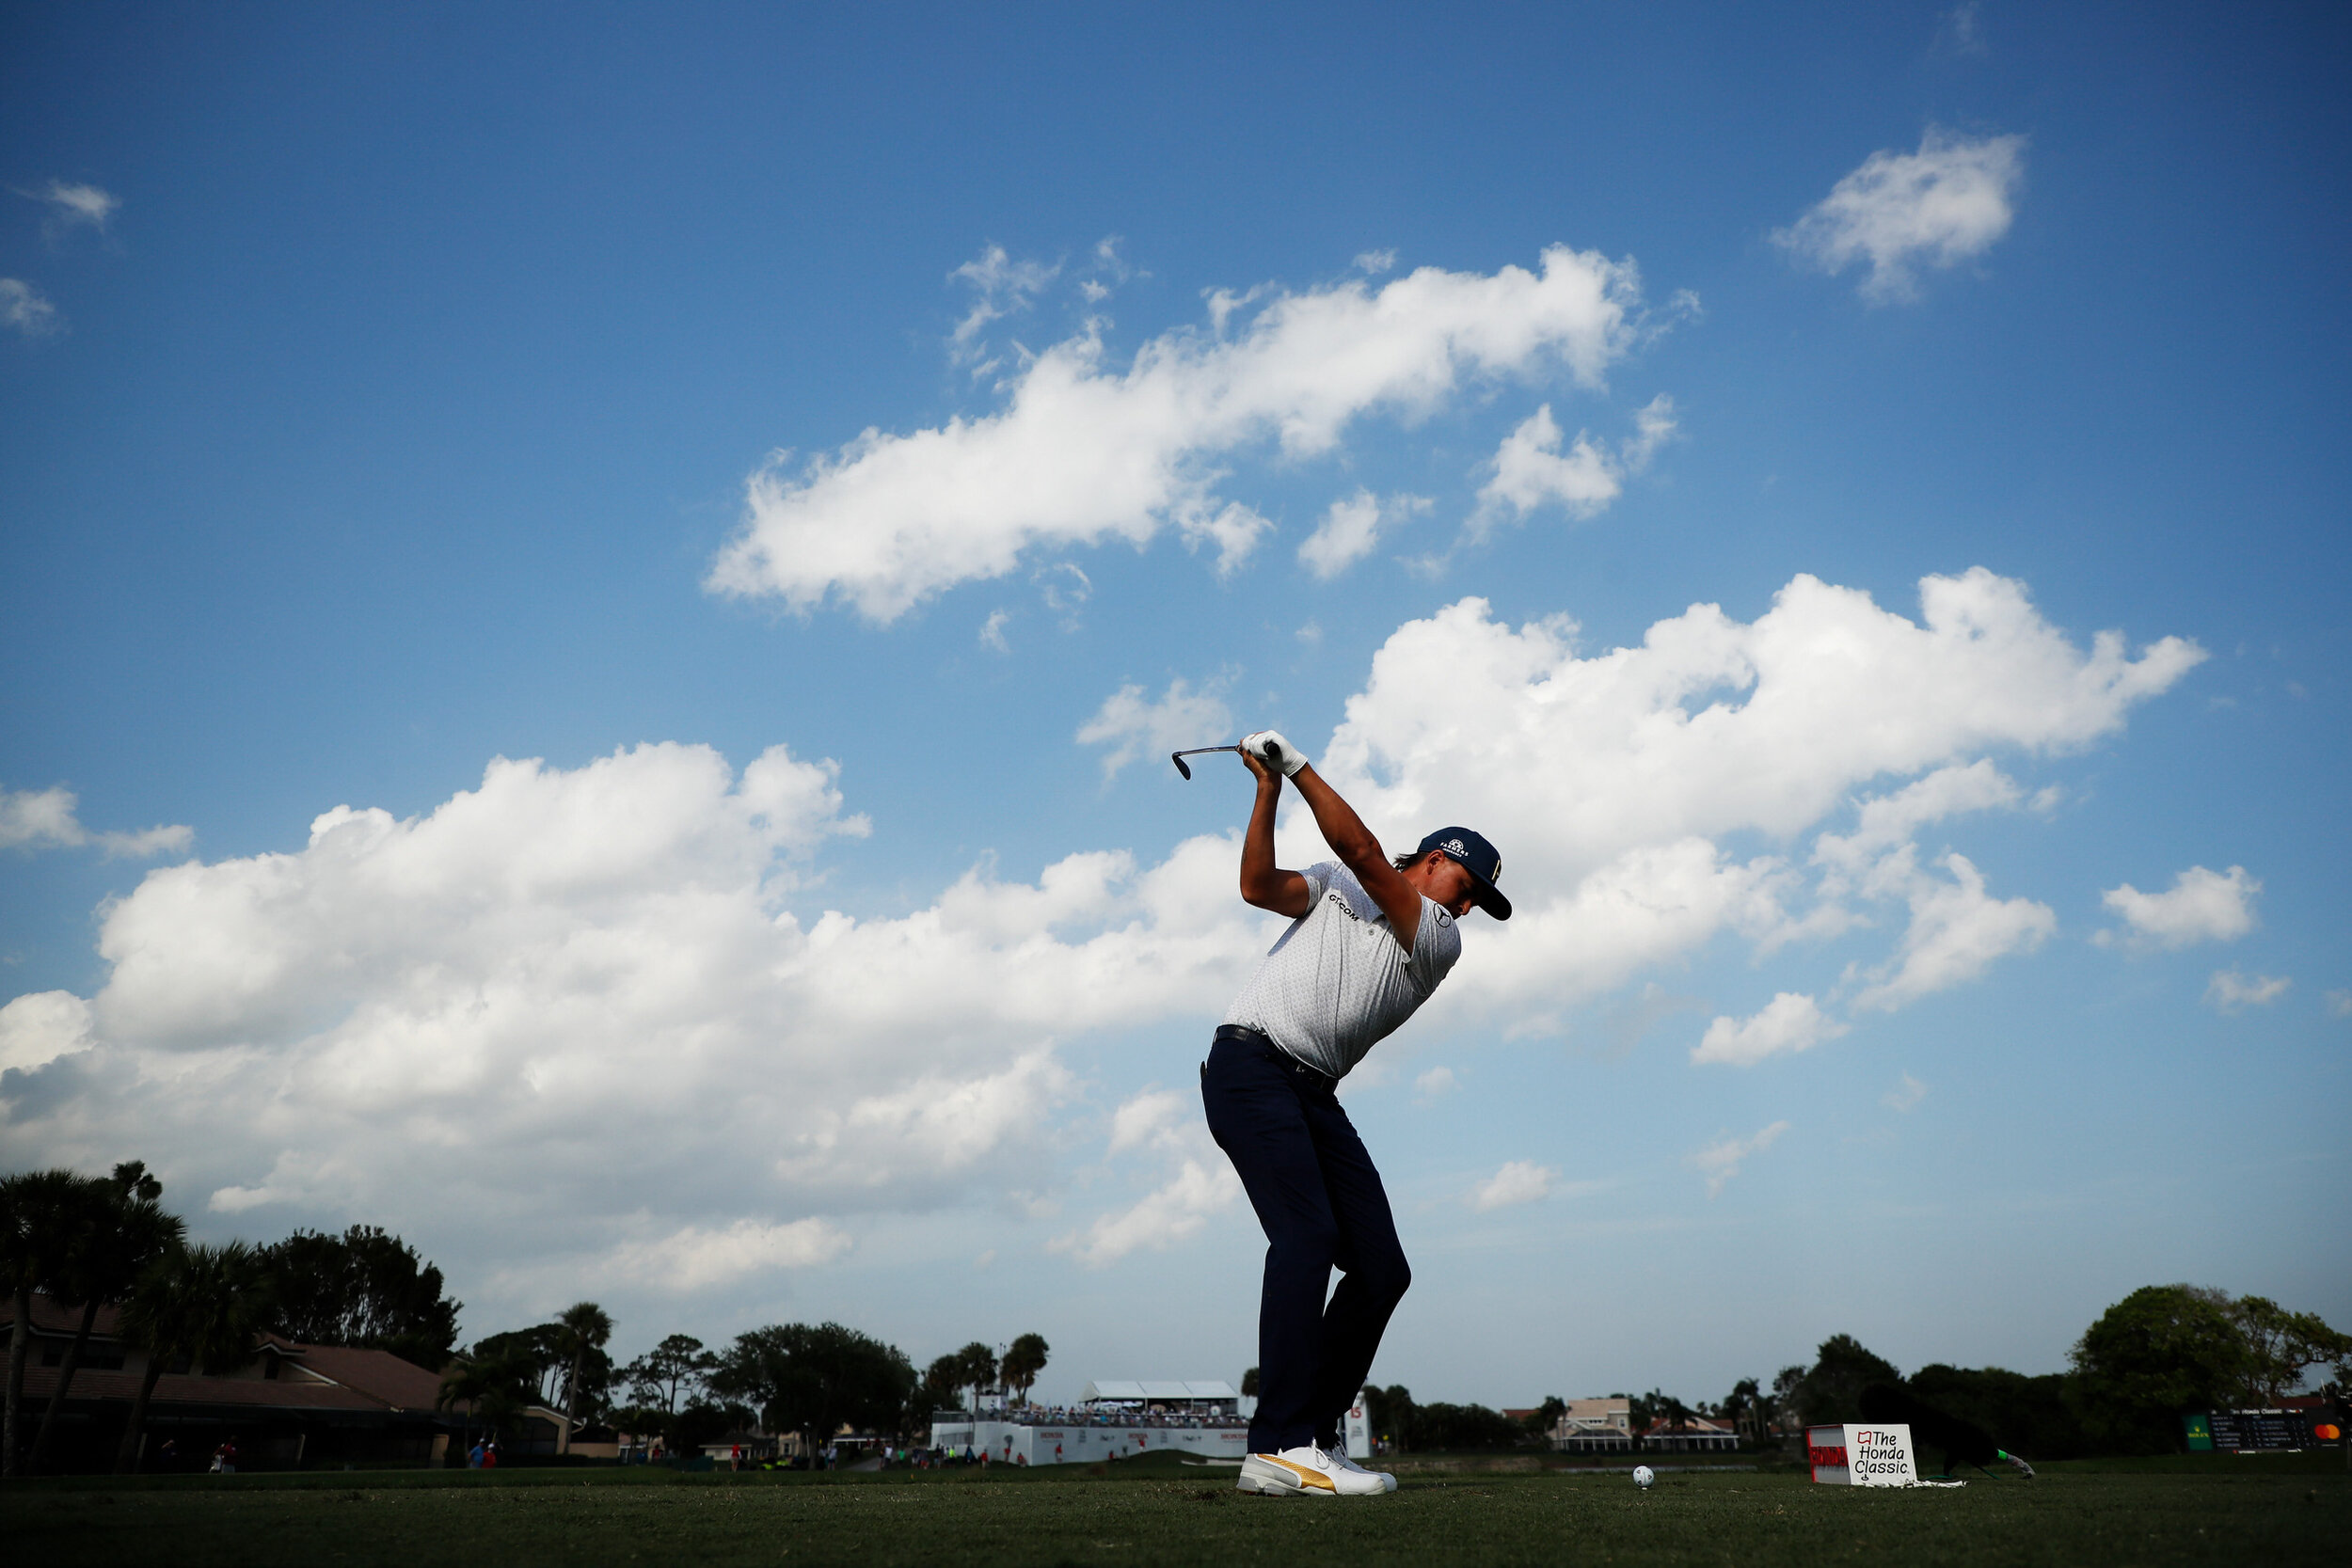  PALM BEACH GARDENS, FLORIDA - MARCH 18: Rickie Fowler of the United States plays his shot from the 15th tee during the first round of The Honda Classic at PGA National Champion course on March 18, 2021 in Palm Beach Gardens, Florida. (Photo by Cliff